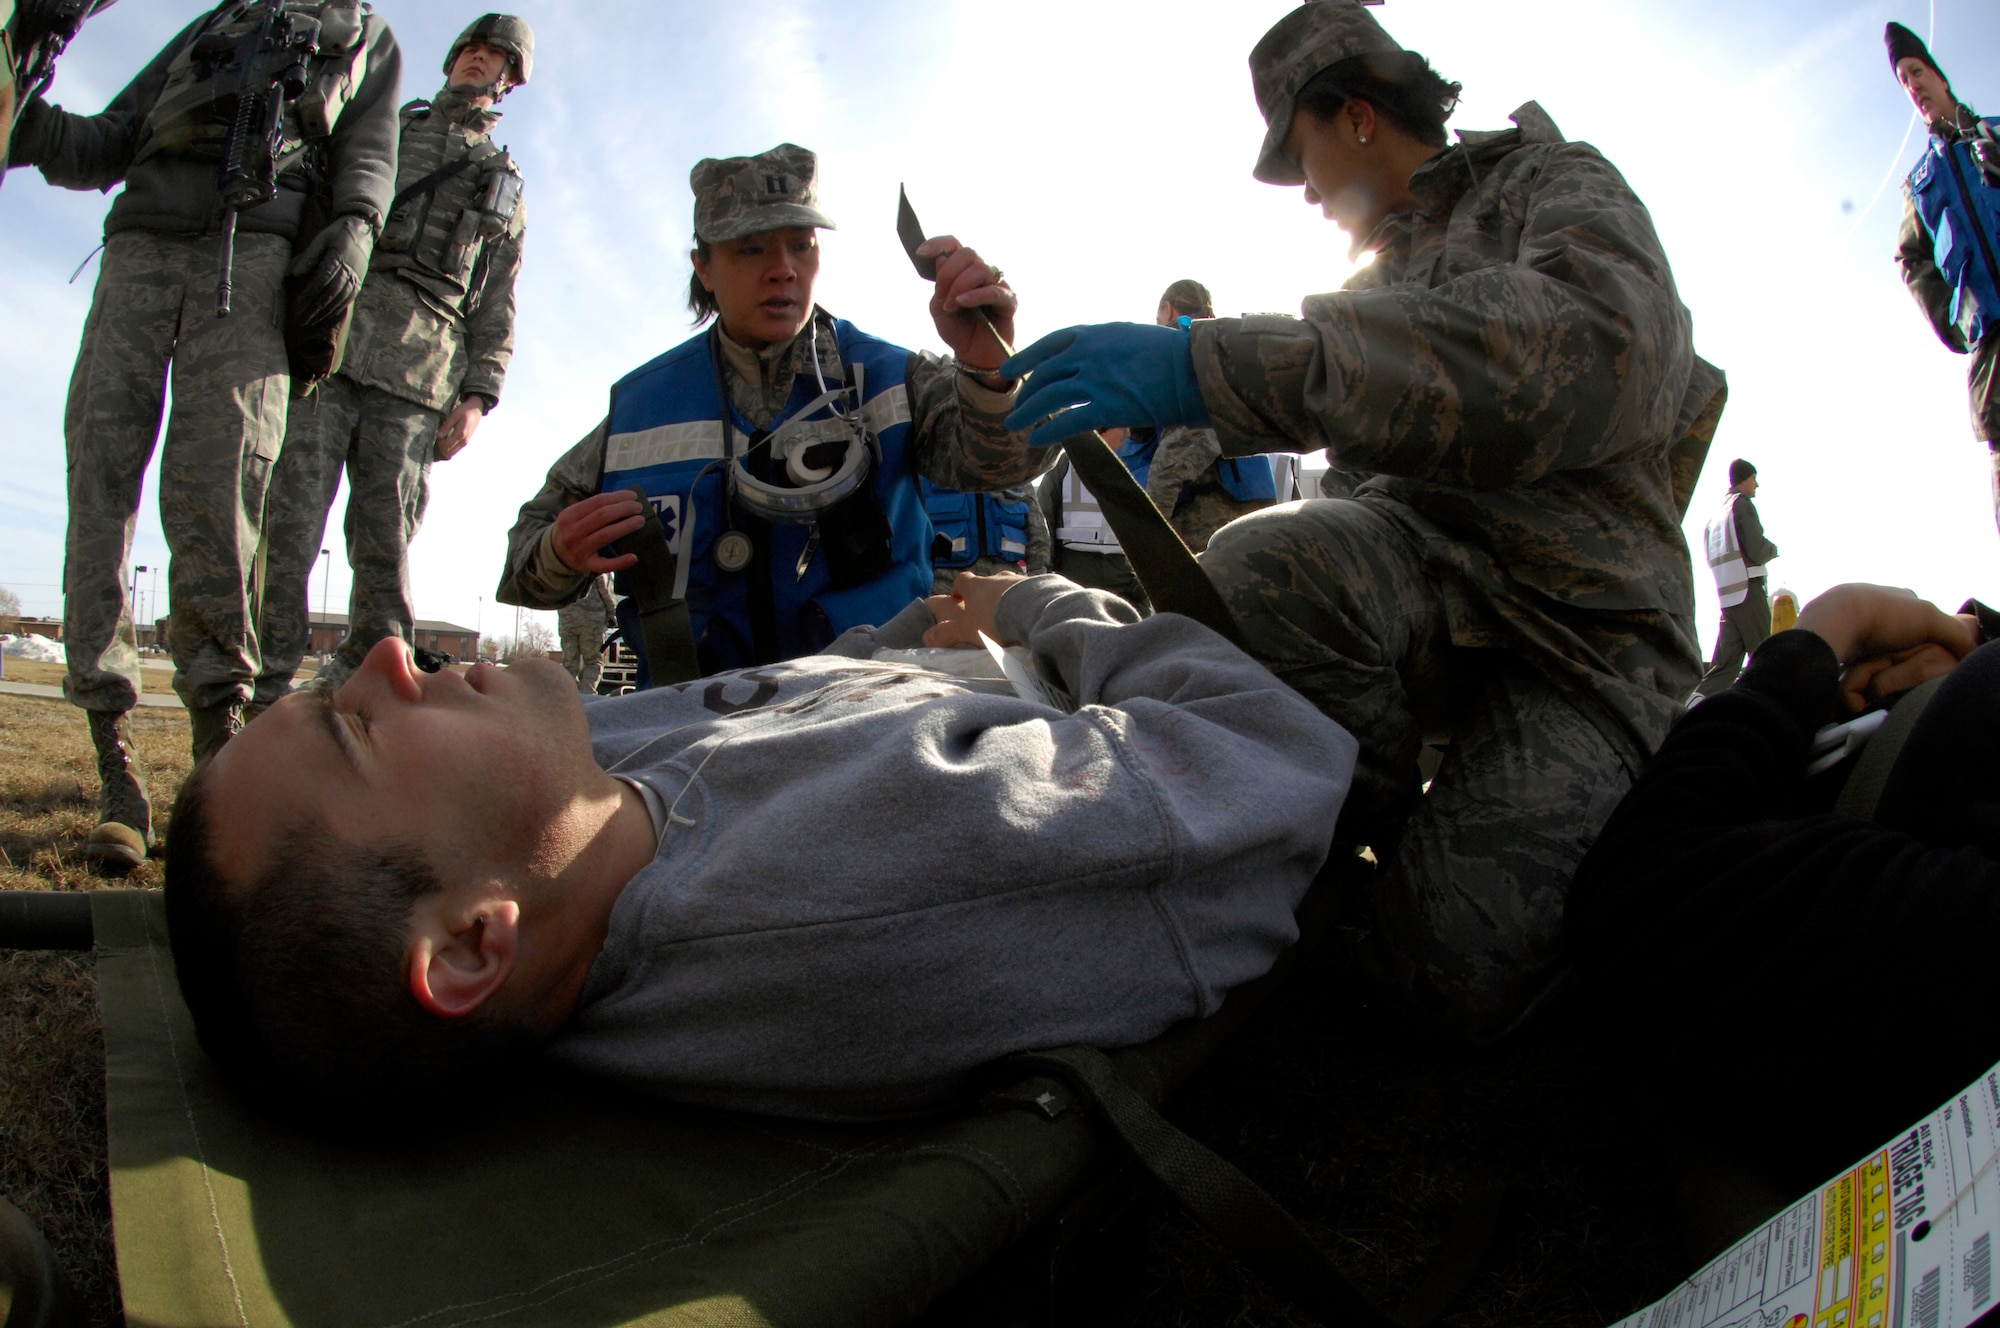 MINOT AIR FORCE BASE, N.D. – Capt. Tomao Rose and Senior Airman Erika Jenkins, both 5th Medical Operations Squadron physicians, assess and treat Airman 1st Class Thomas Kennedy, 91st Missile Maintenance Squadron periodic maintenance team member and “simulated victim”, during the major accident response exercise at Minot AFB March 26. Exercises like this MARE prepare base personnel for possible real-world situations as well as testing communication and emergency procedures. (U.S. Air Force photo by Senior Airman Jesse Lopez)